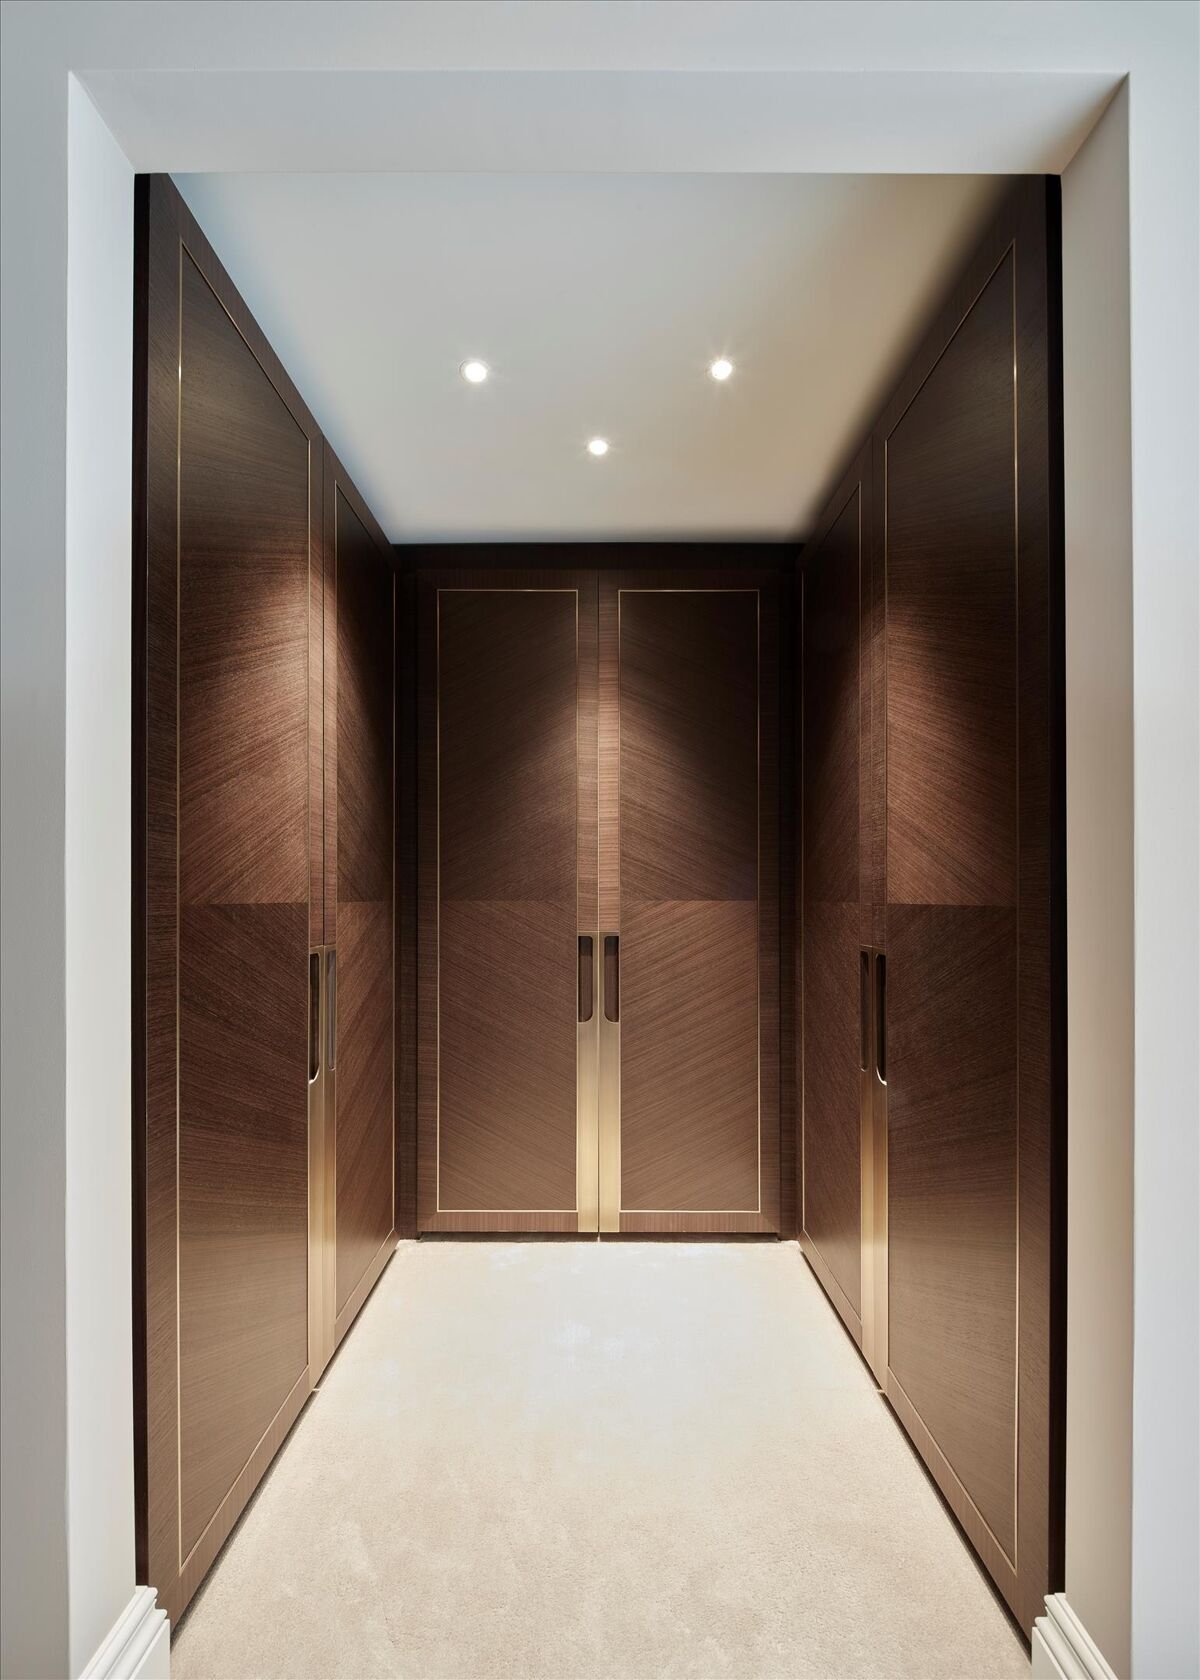 walk-in wardrobes by fine finishing contractor Ant Yapi, a Turkish Construction Company